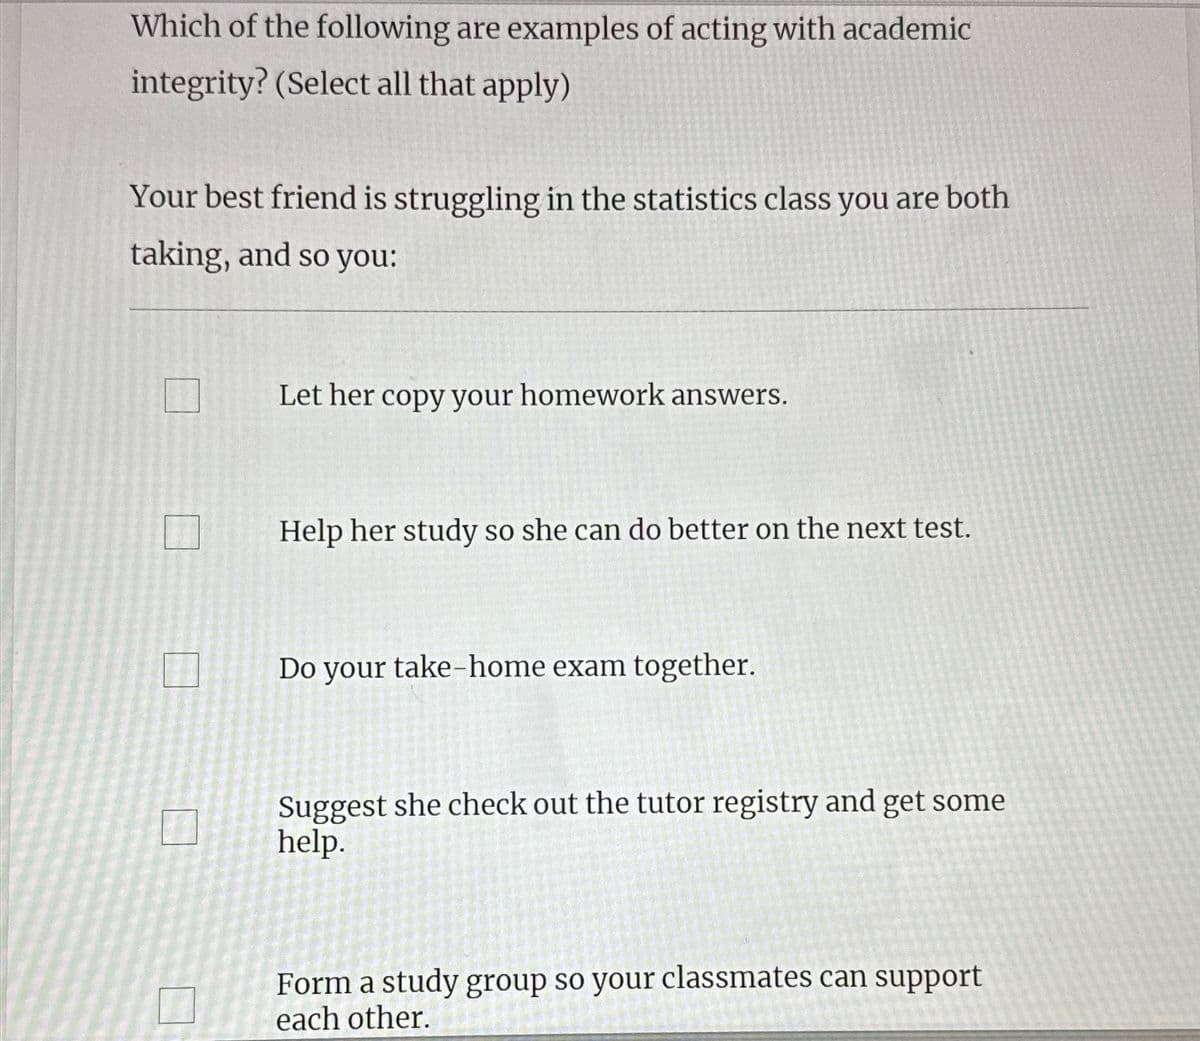 Which of the following are examples of acting with academic
integrity? (Select all that apply)
Your best friend is struggling in the statistics class you are both
taking, and so you:
Let her copy your homework answers.
Help her study so she can do better on the next test.
Do your take-home exam together.
Suggest she check out the tutor registry and get some
help.
Form a study group so your classmates can support
each other.